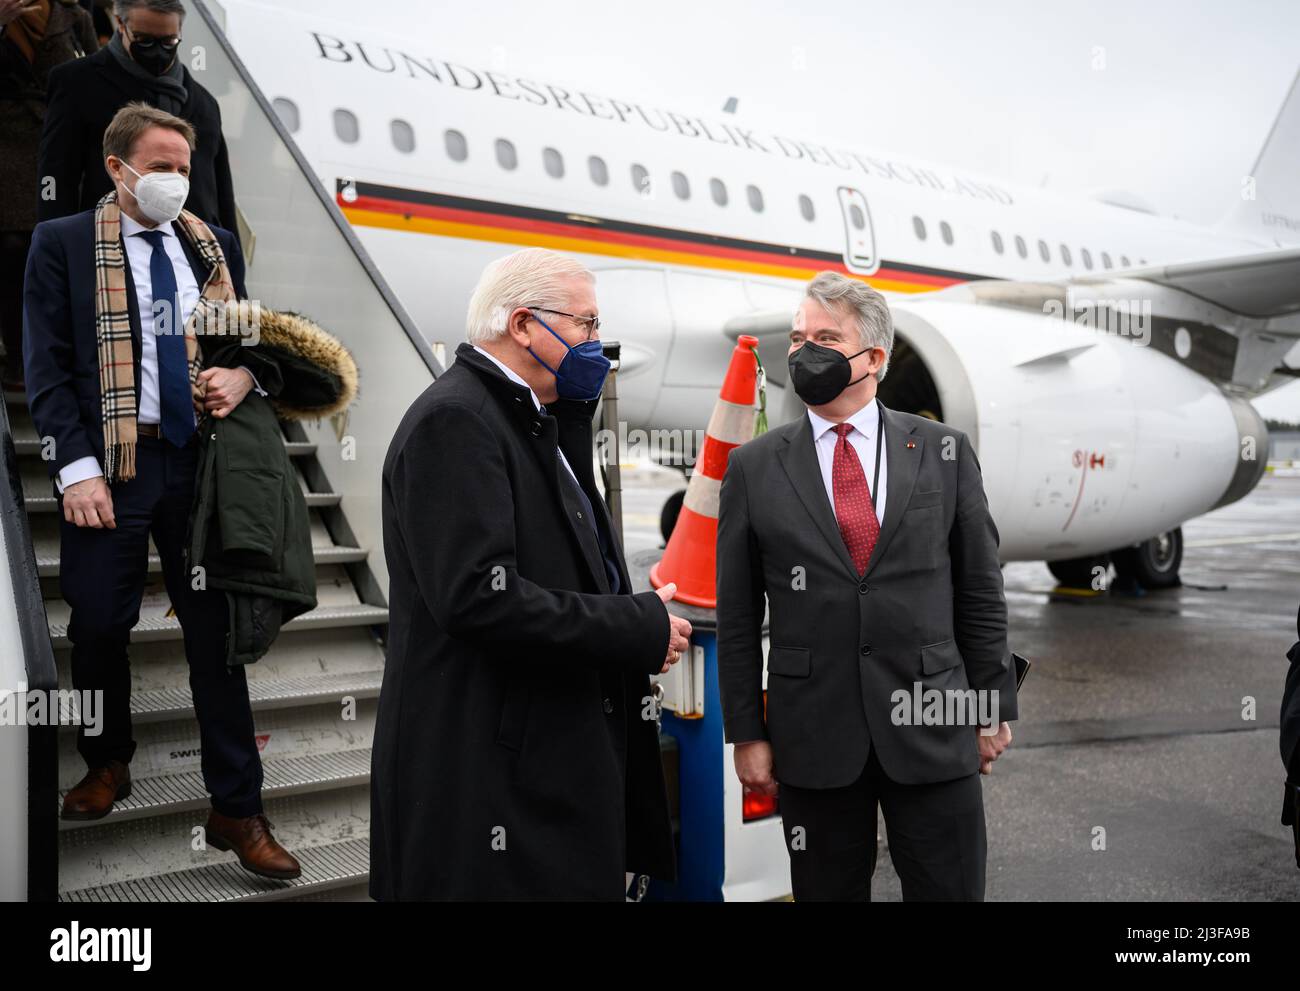 Helsinki, Finland. 08th Apr, 2022. German President Frank-Walter Steinmeier arrives at Helsinki-Vantaa Airport and is welcomed by Konrad Arz von Straussenburg, Germany's Ambassador to Finland. President Steinmeier is in Finland for a one-day visit. The trip will focus on the impact of Russia's war of aggression in Ukraine on neighboring European countries. Credit: Bernd von Jutrczenka/dpa/Alamy Live News Stock Photo